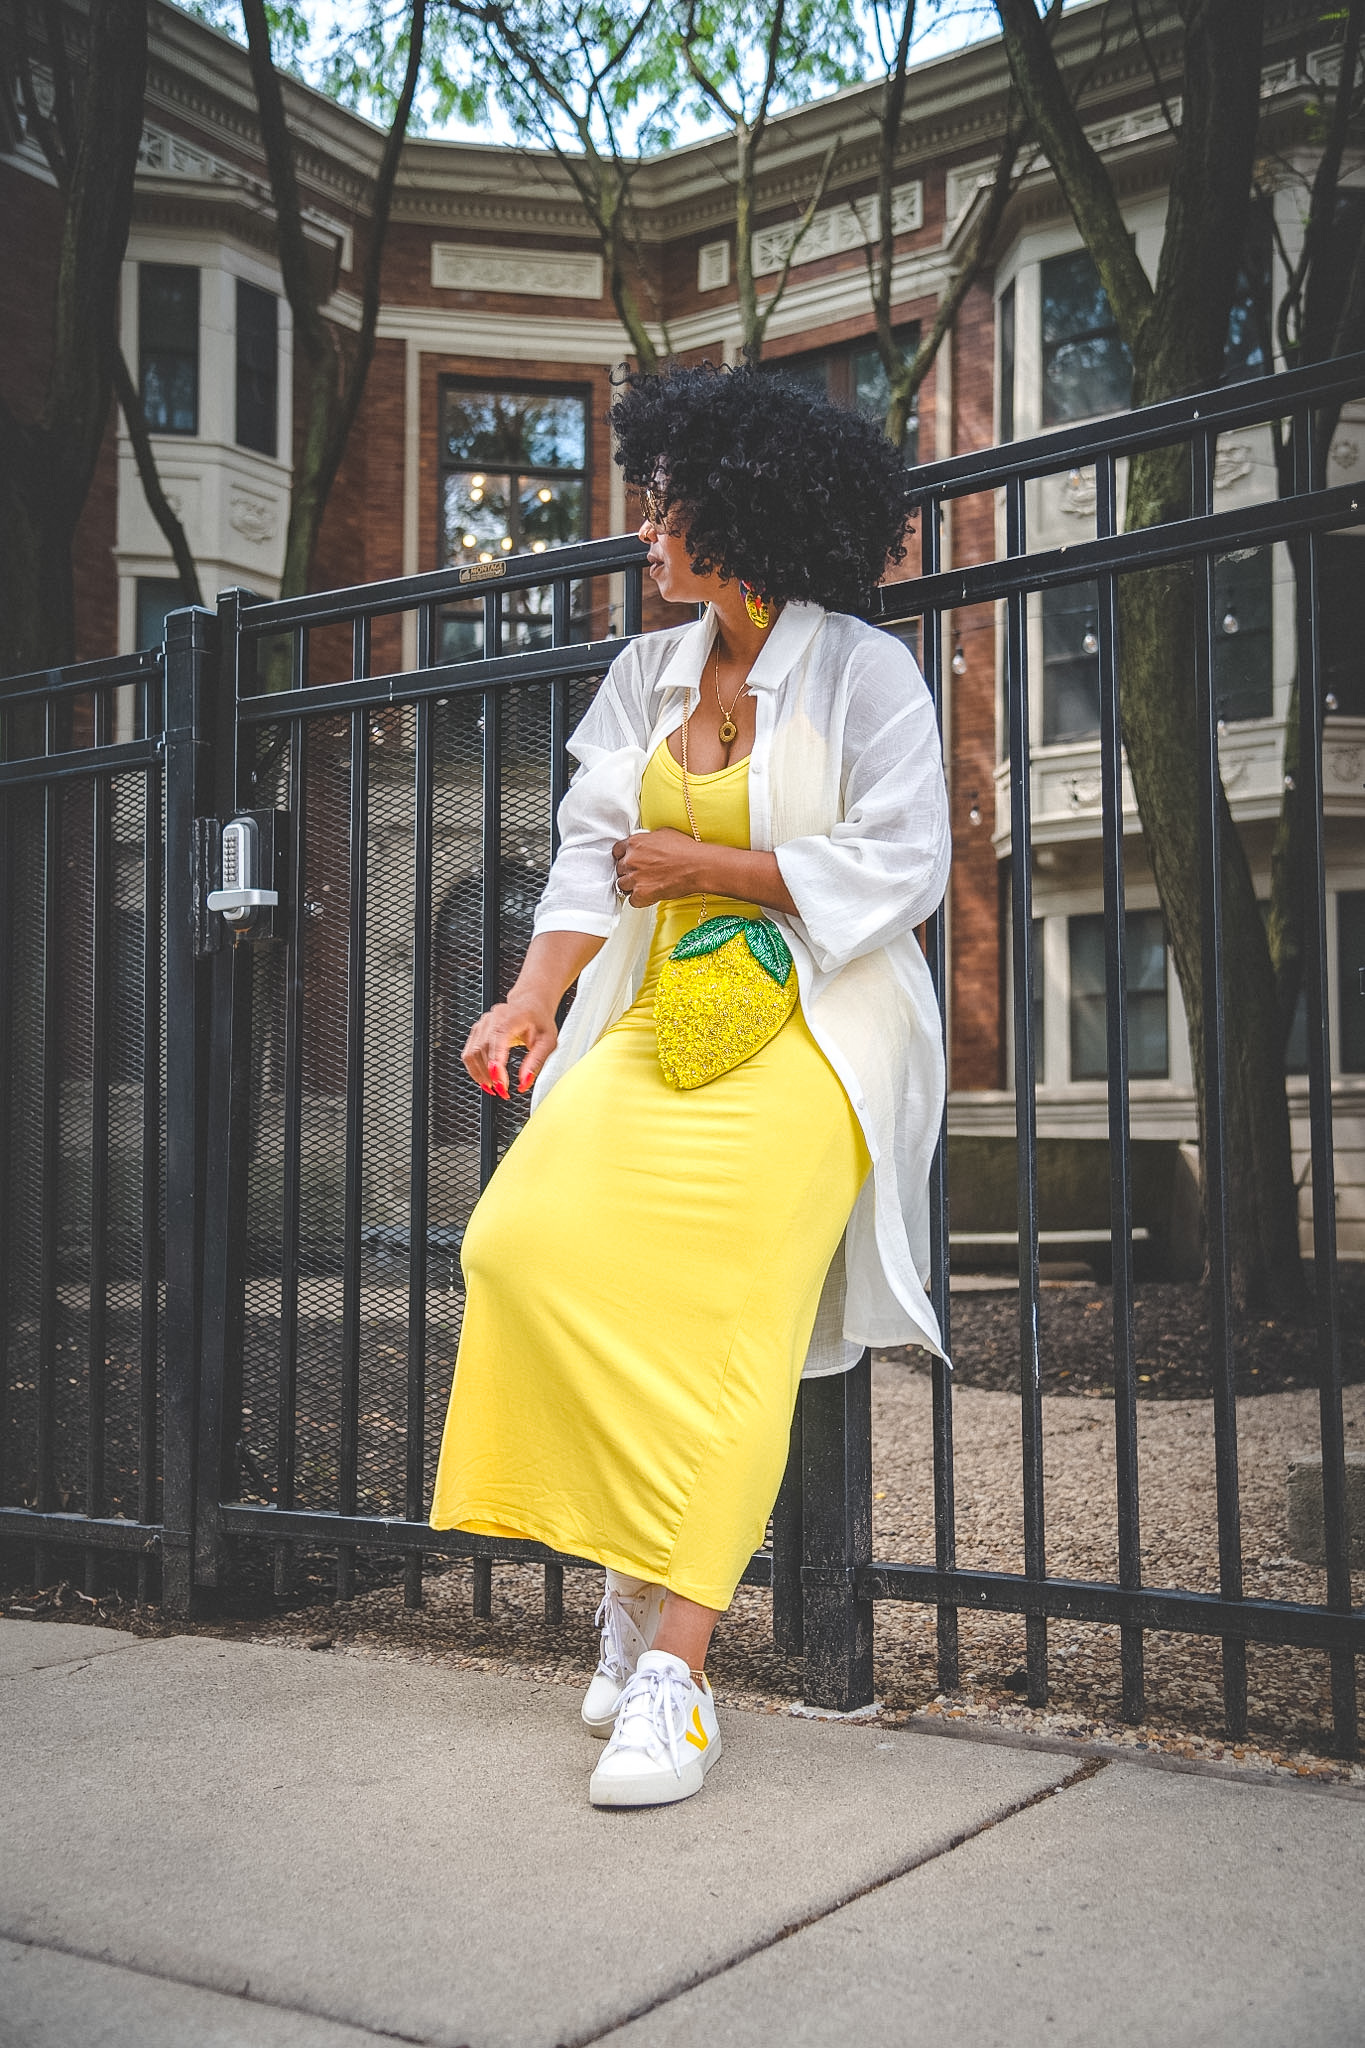 SWEENEE STYLE, HOW TO STYLE SUMMER BASICS, SUMMER OUTFIT IDEAS, HOW TO WEAR YOUR NATURAL CURLS, STYLING BASICS, INDIANAPOLIS FASHION BLOGGER